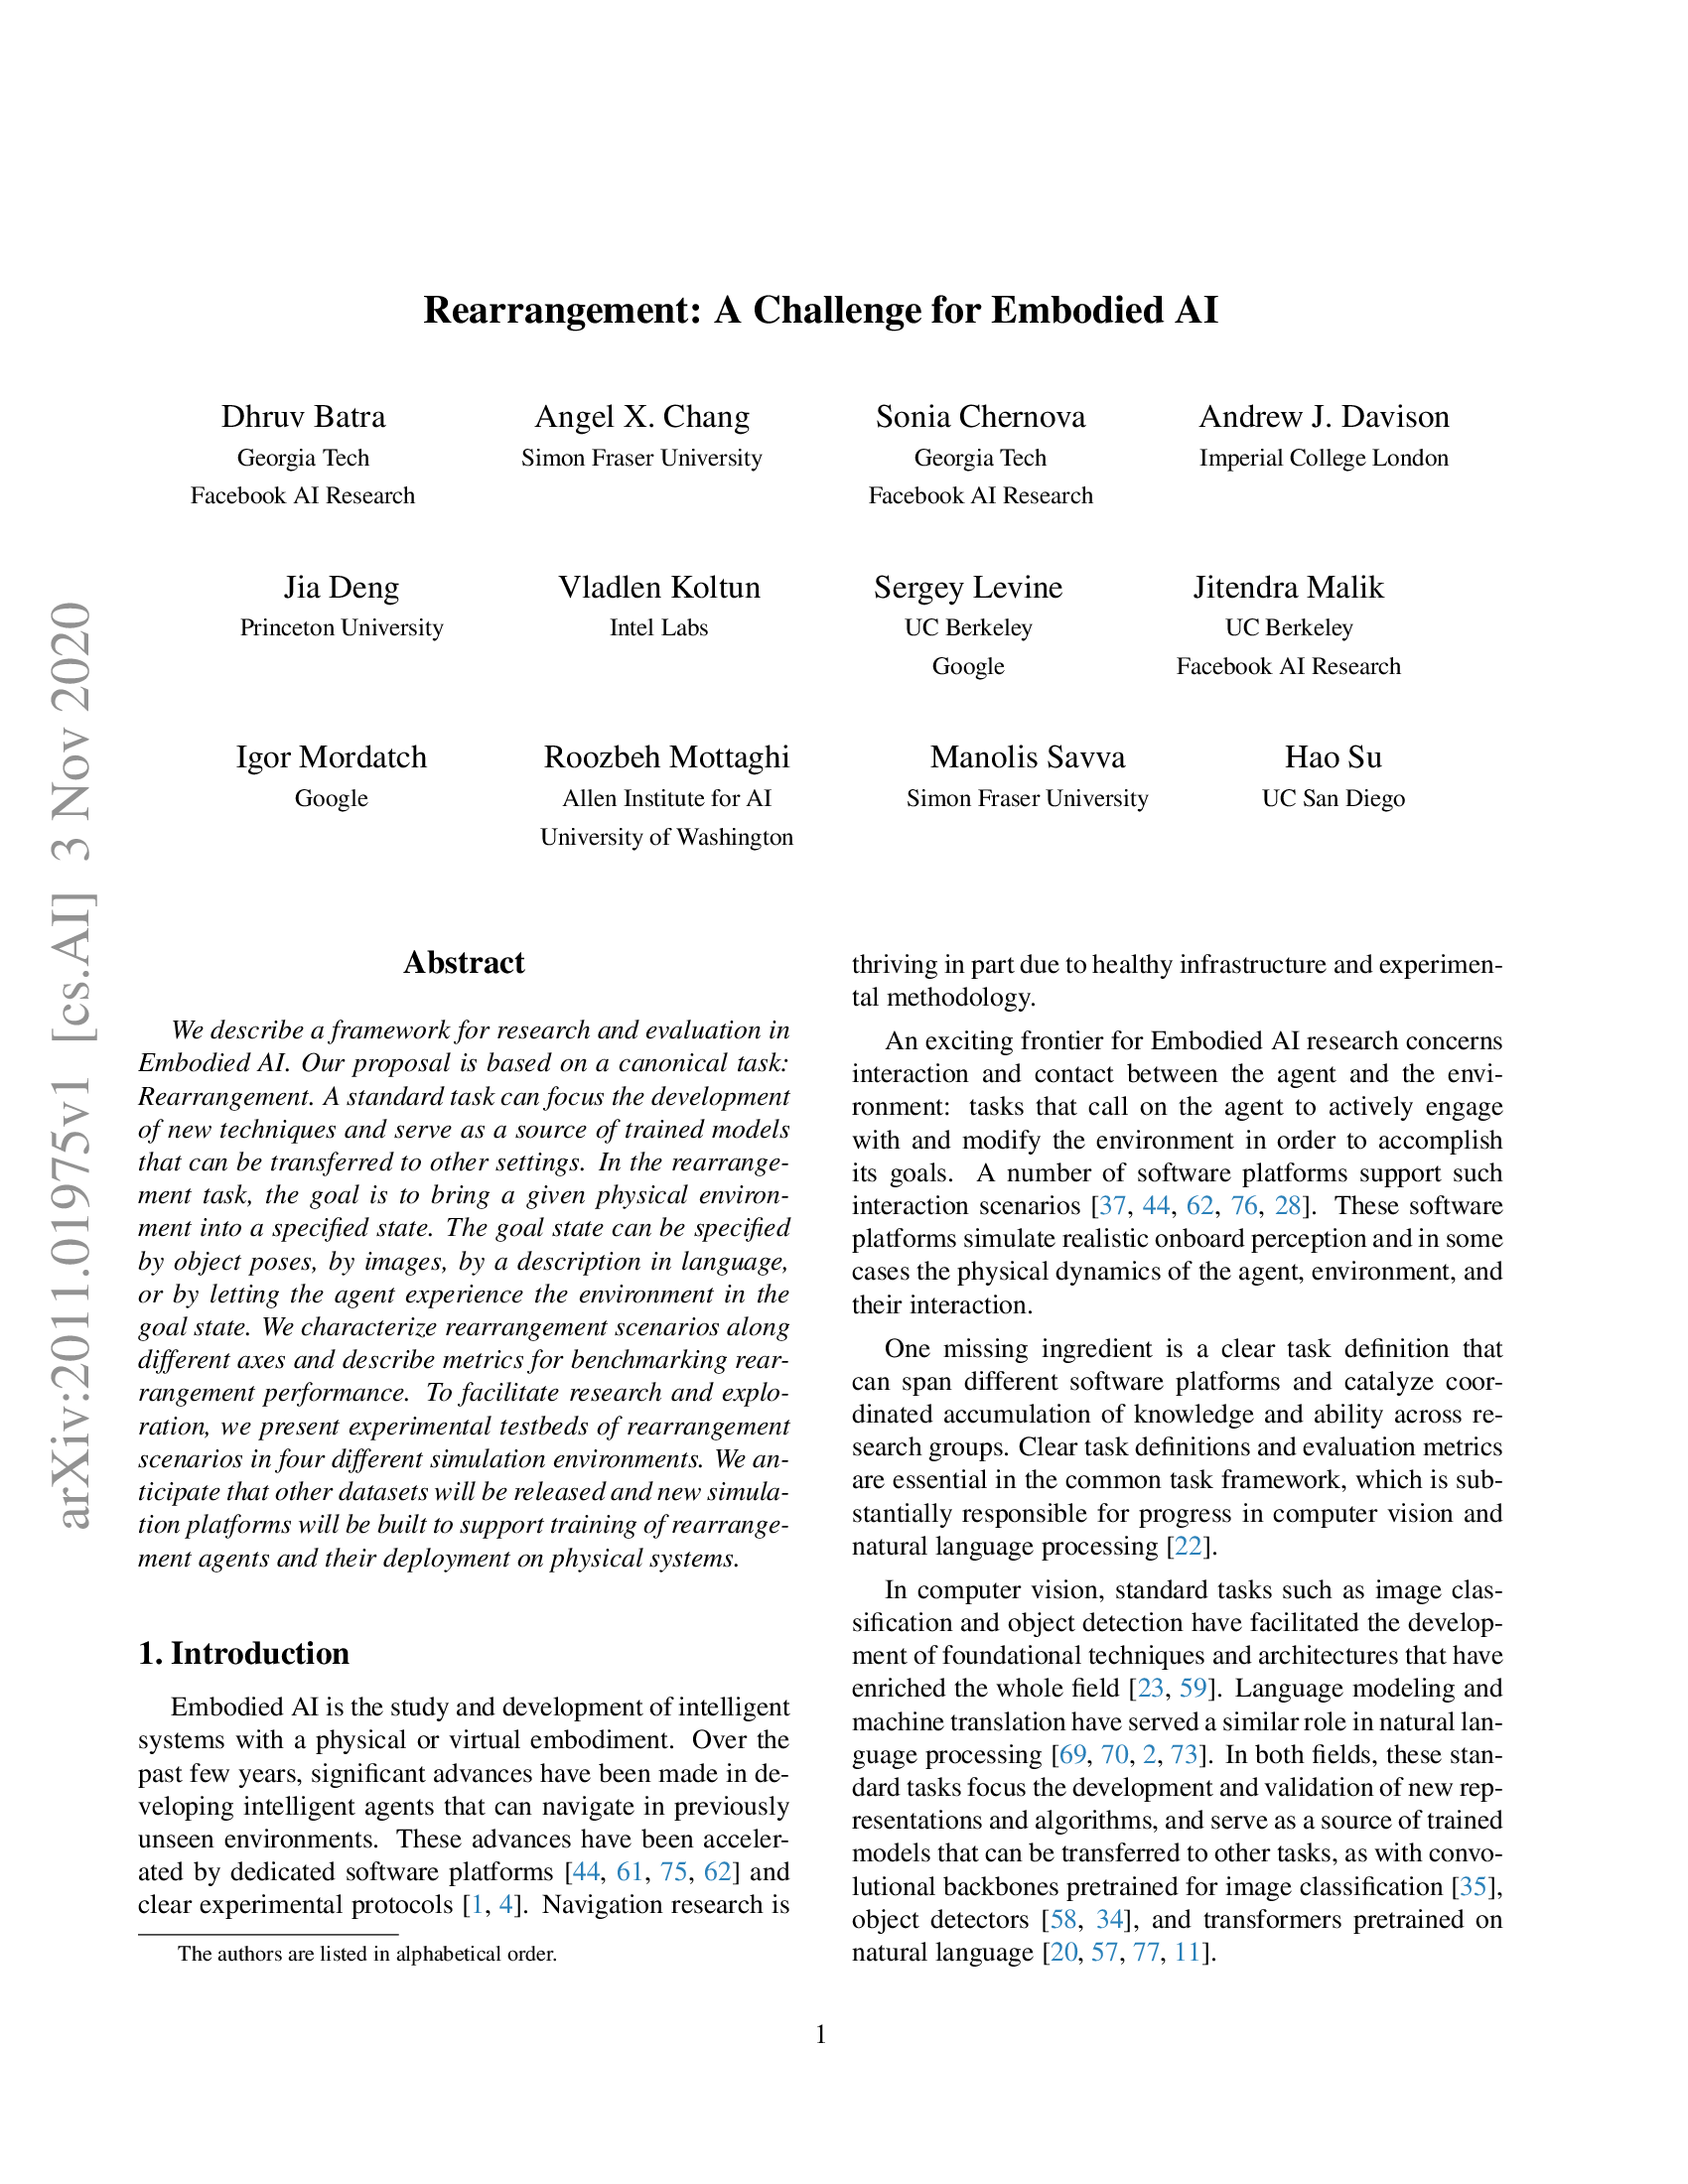 Rearrangement: A Challenge for Embodied AI